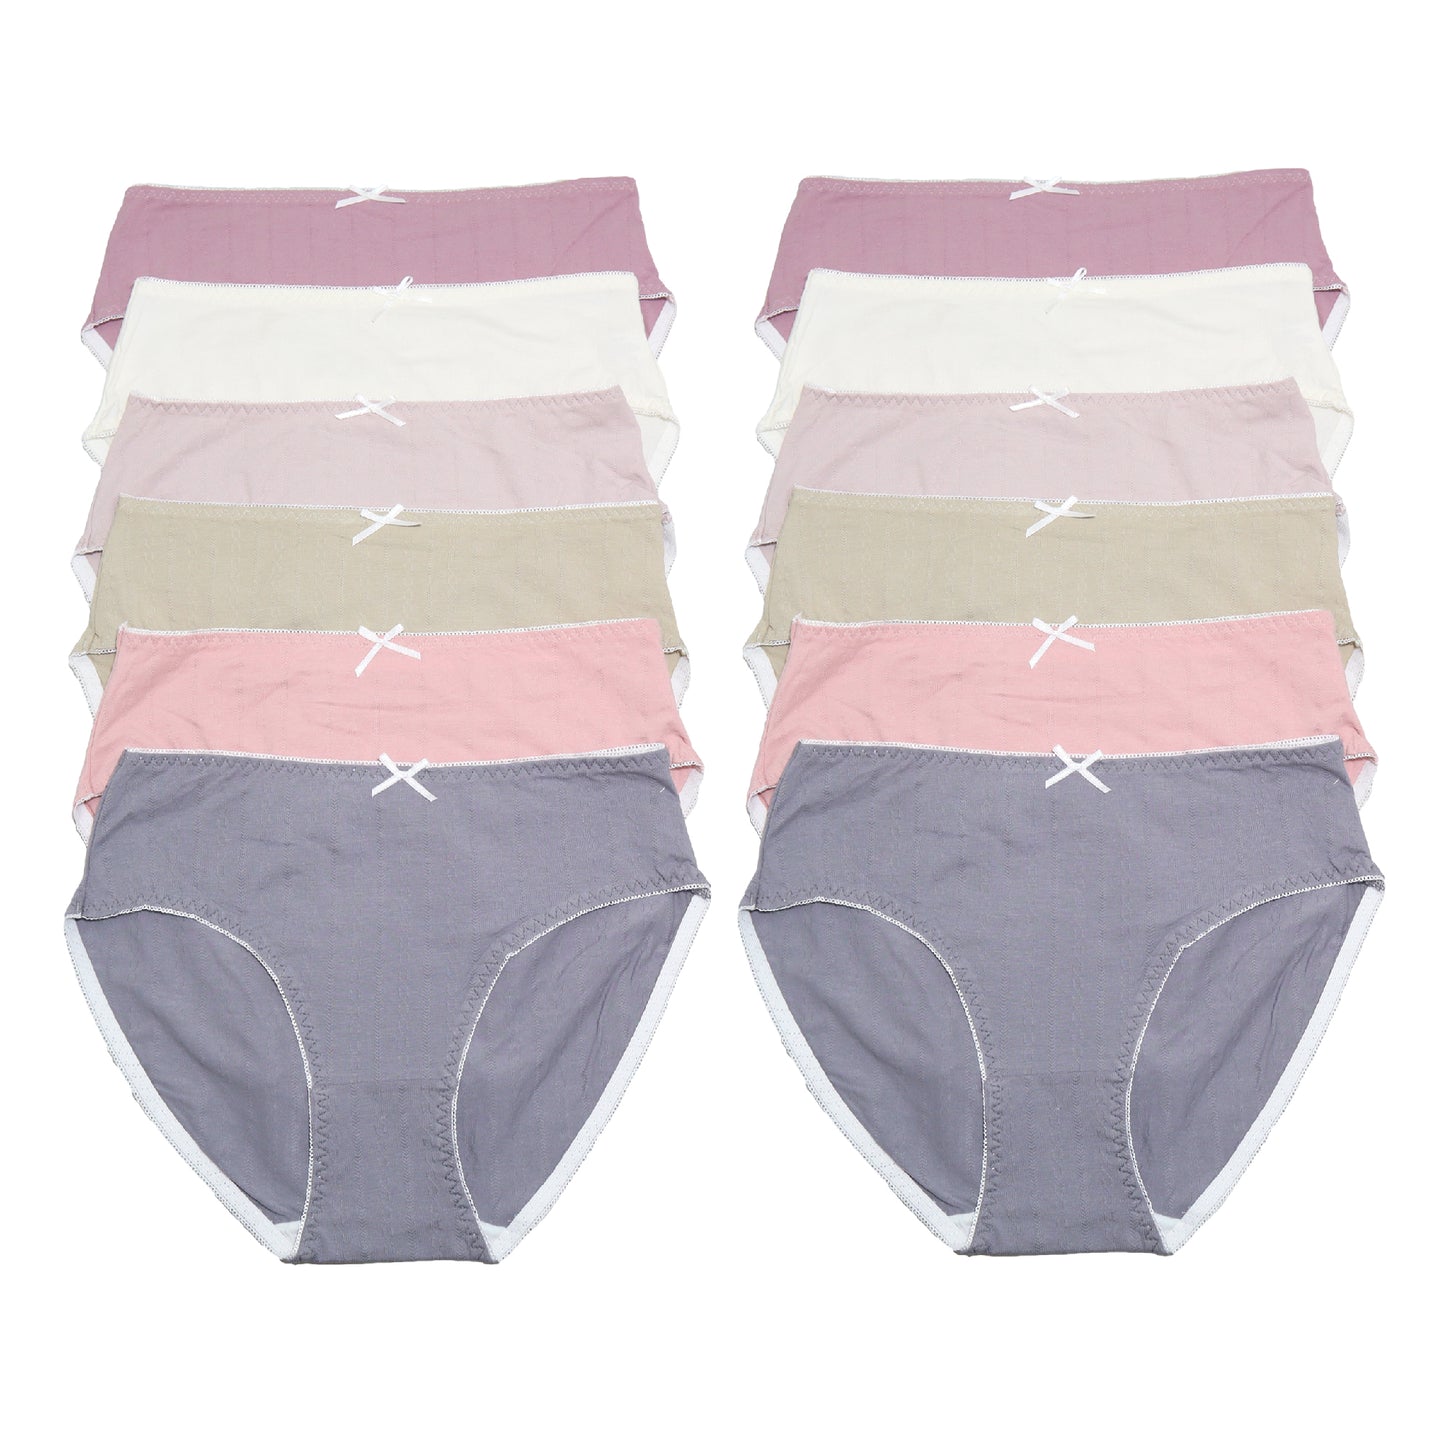 Cotton Hiphugger Panties with Cable Knit Design (12-Pack)